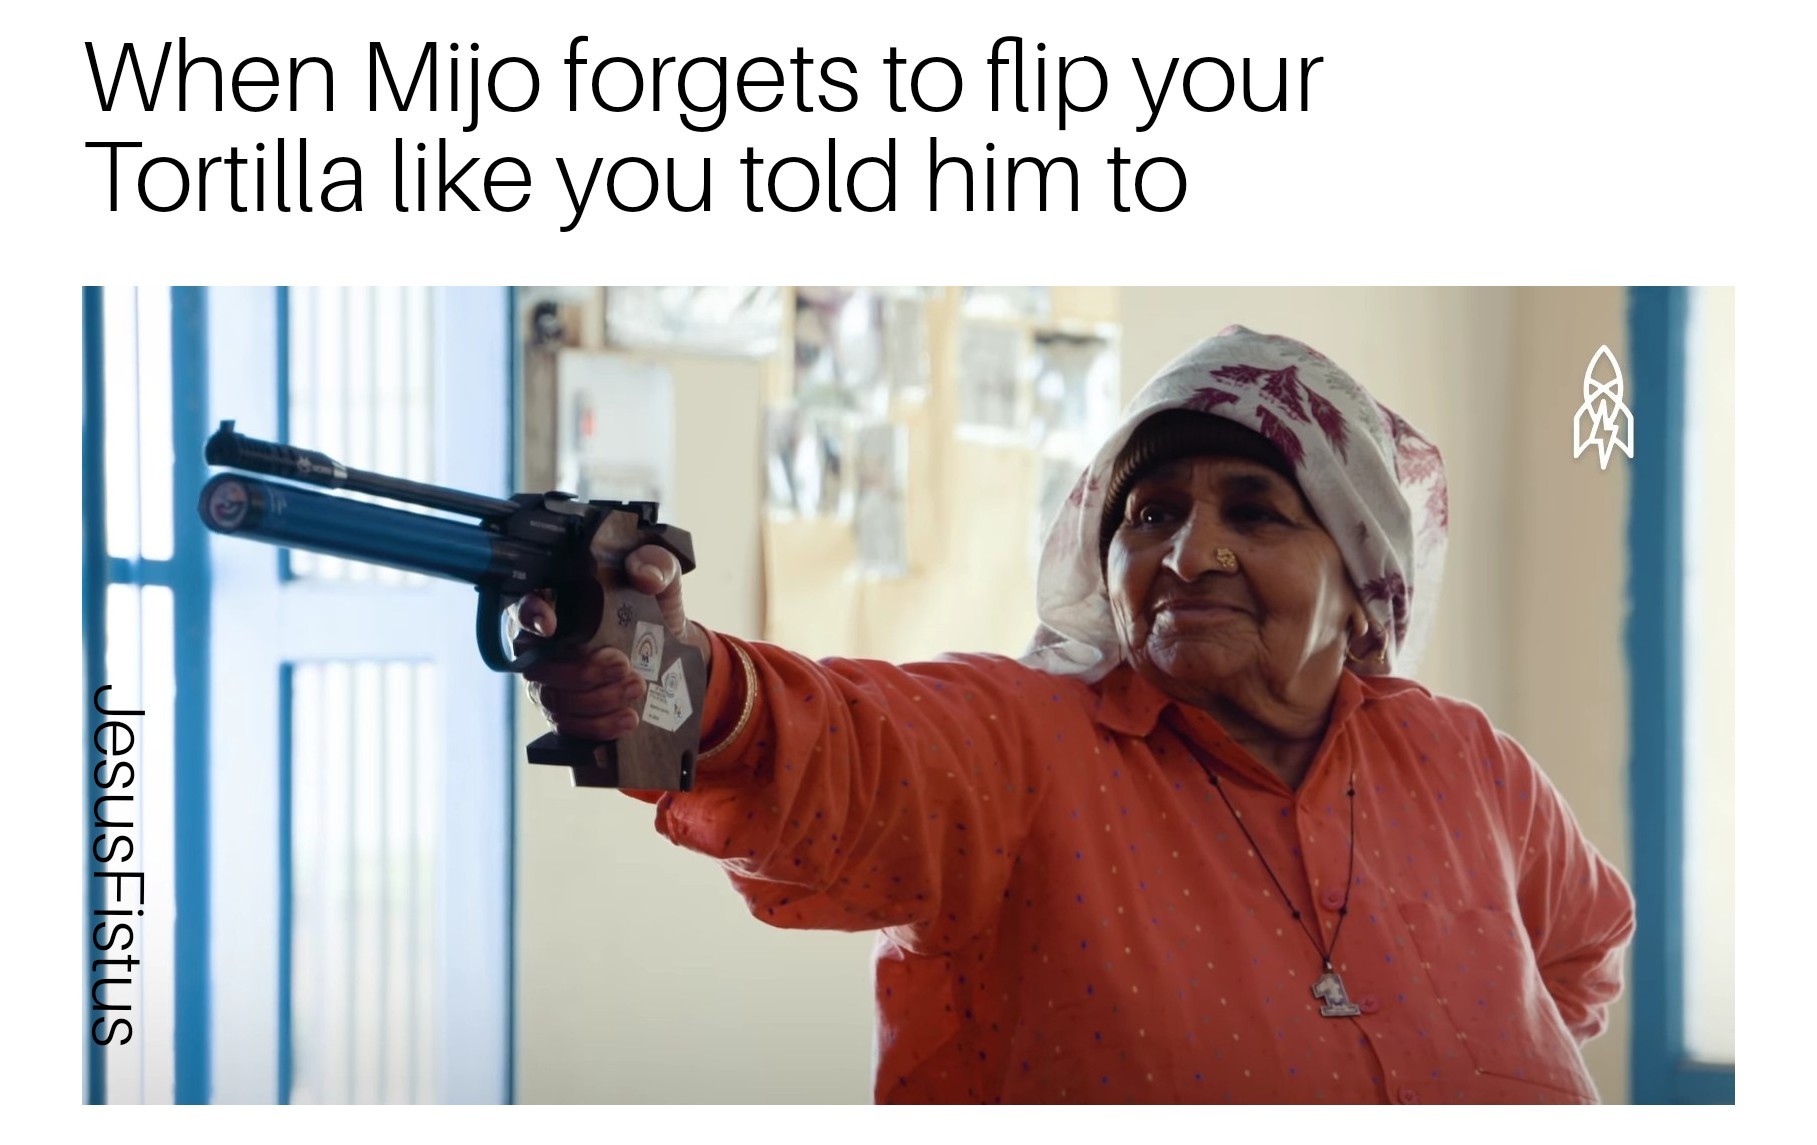 That granny is badass. There's a YT video about her - meme